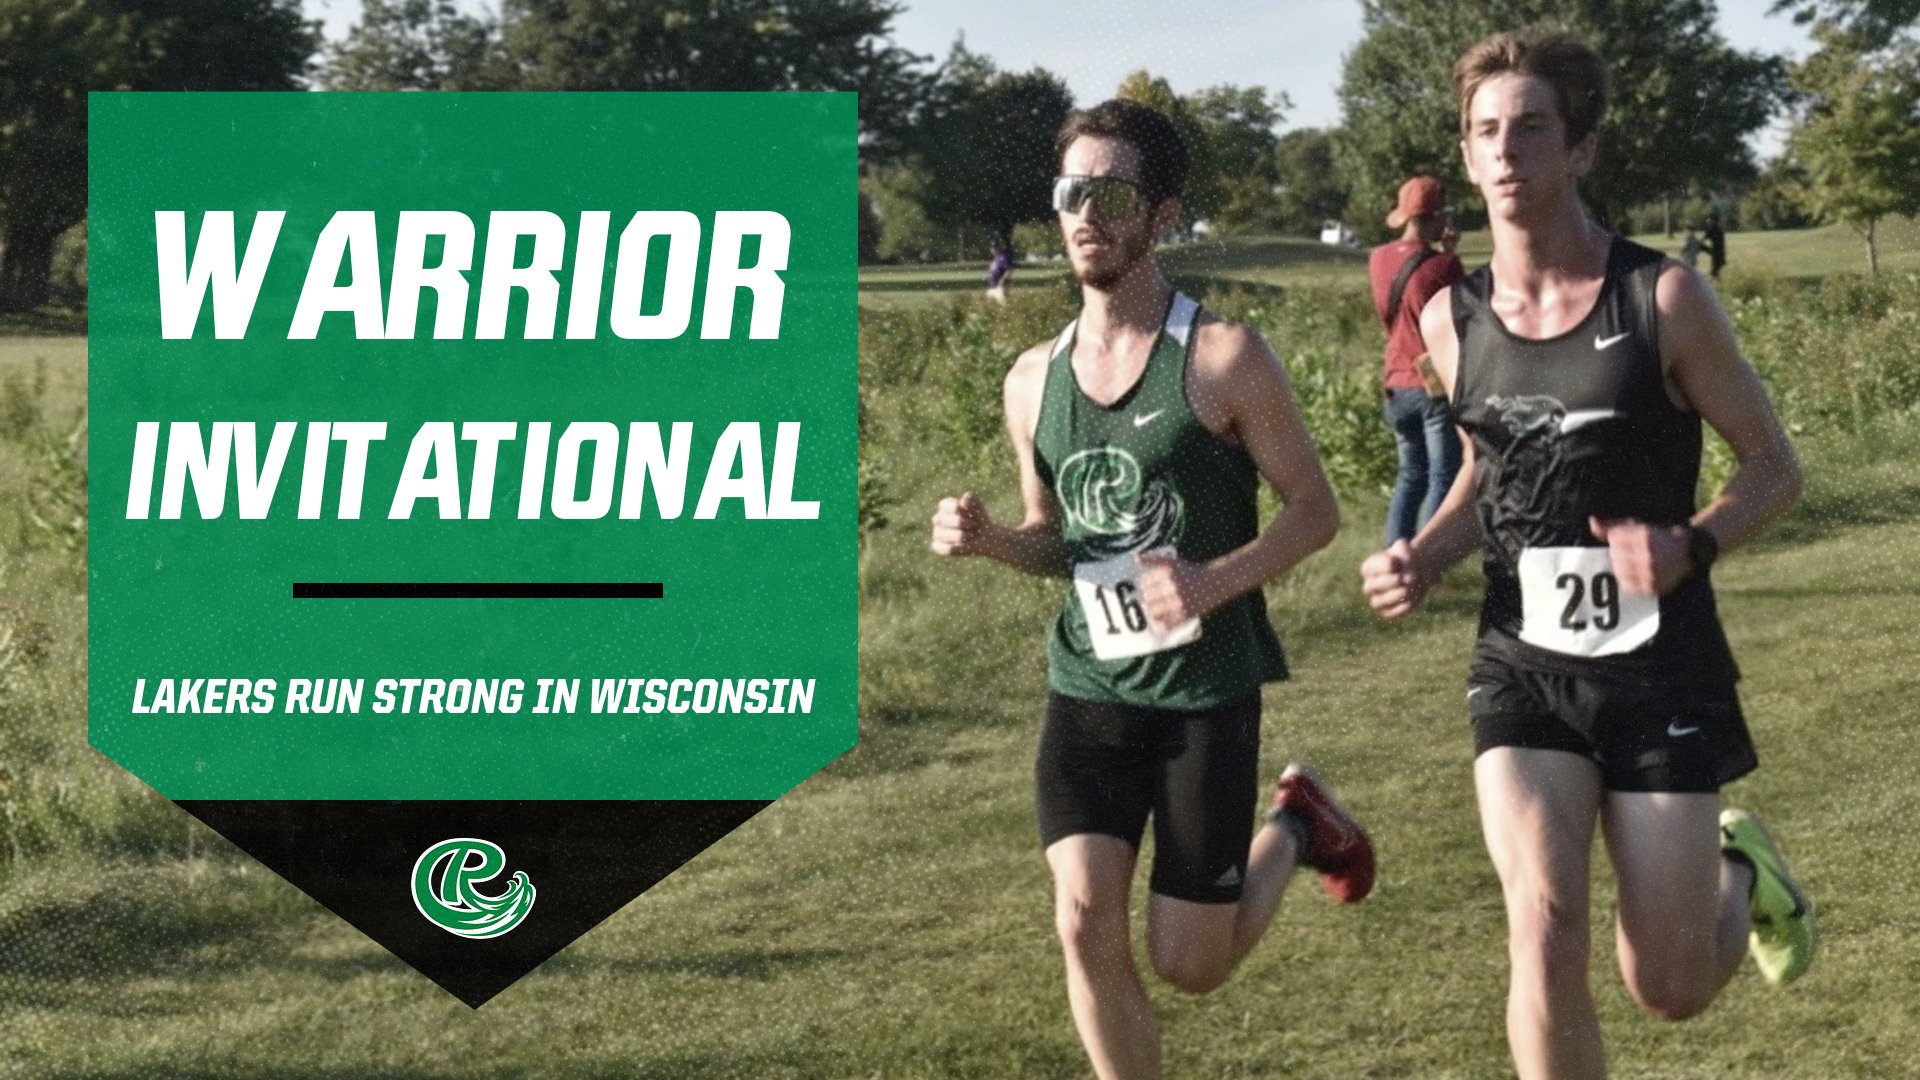 Lakers Run Strong At Warrior Invitational In Wisconsin